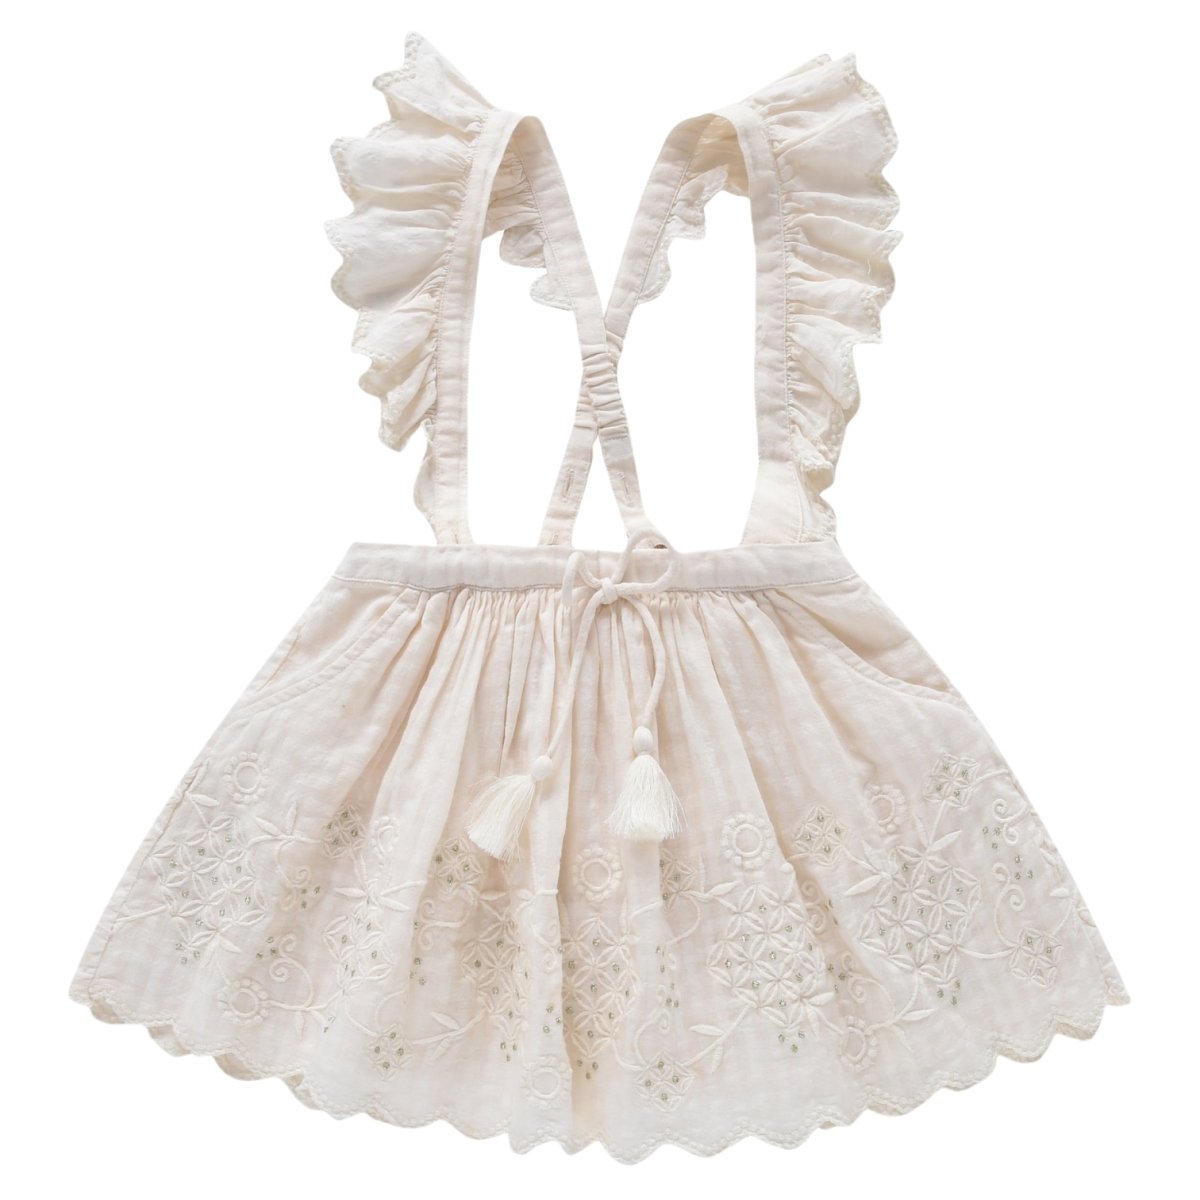 LACE RIOLA SKIRT W/ SUSPENDERS - SKIRTS